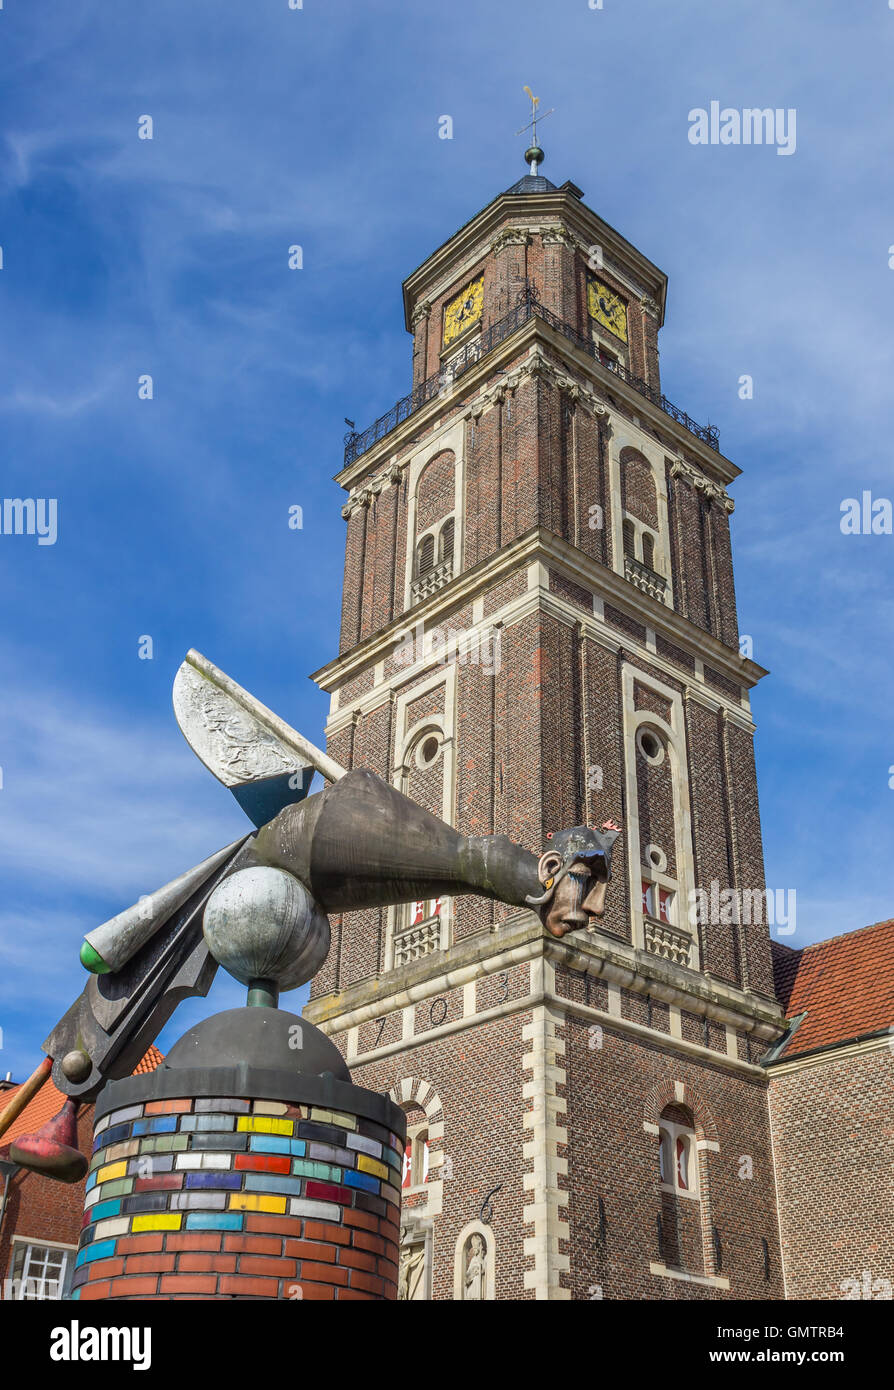 Sculpture and church tower in Coesfeld, Germany Stock Photo